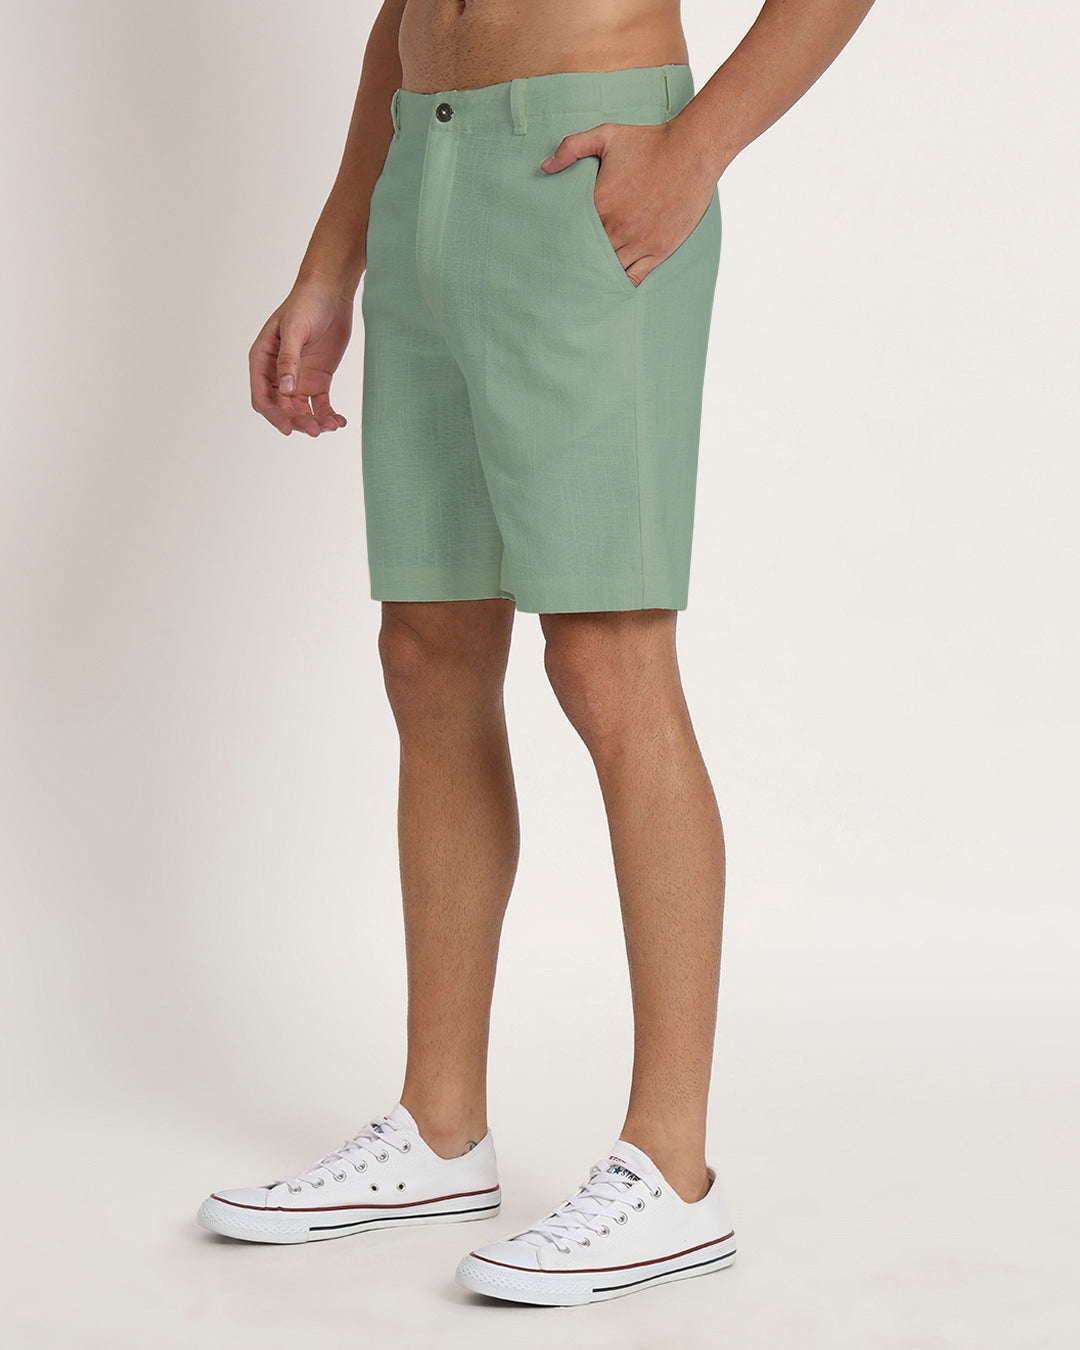 Ready For Anything Spring Green Men's Shorts